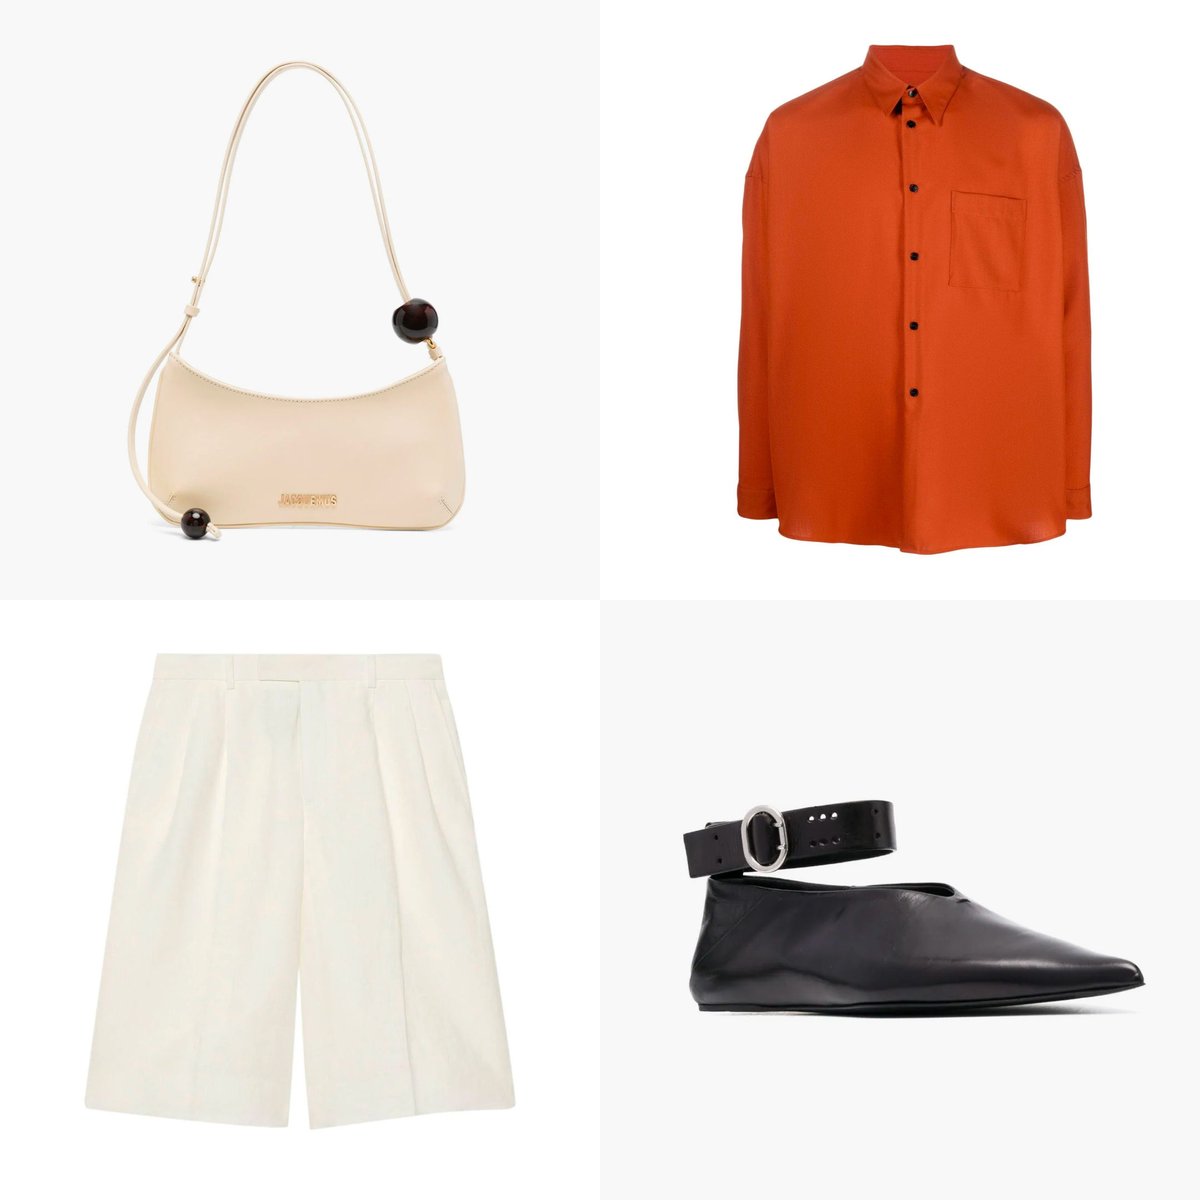 New arrivals from Jacquemus, Marni, Gucci and more. shorturl.at/imG36